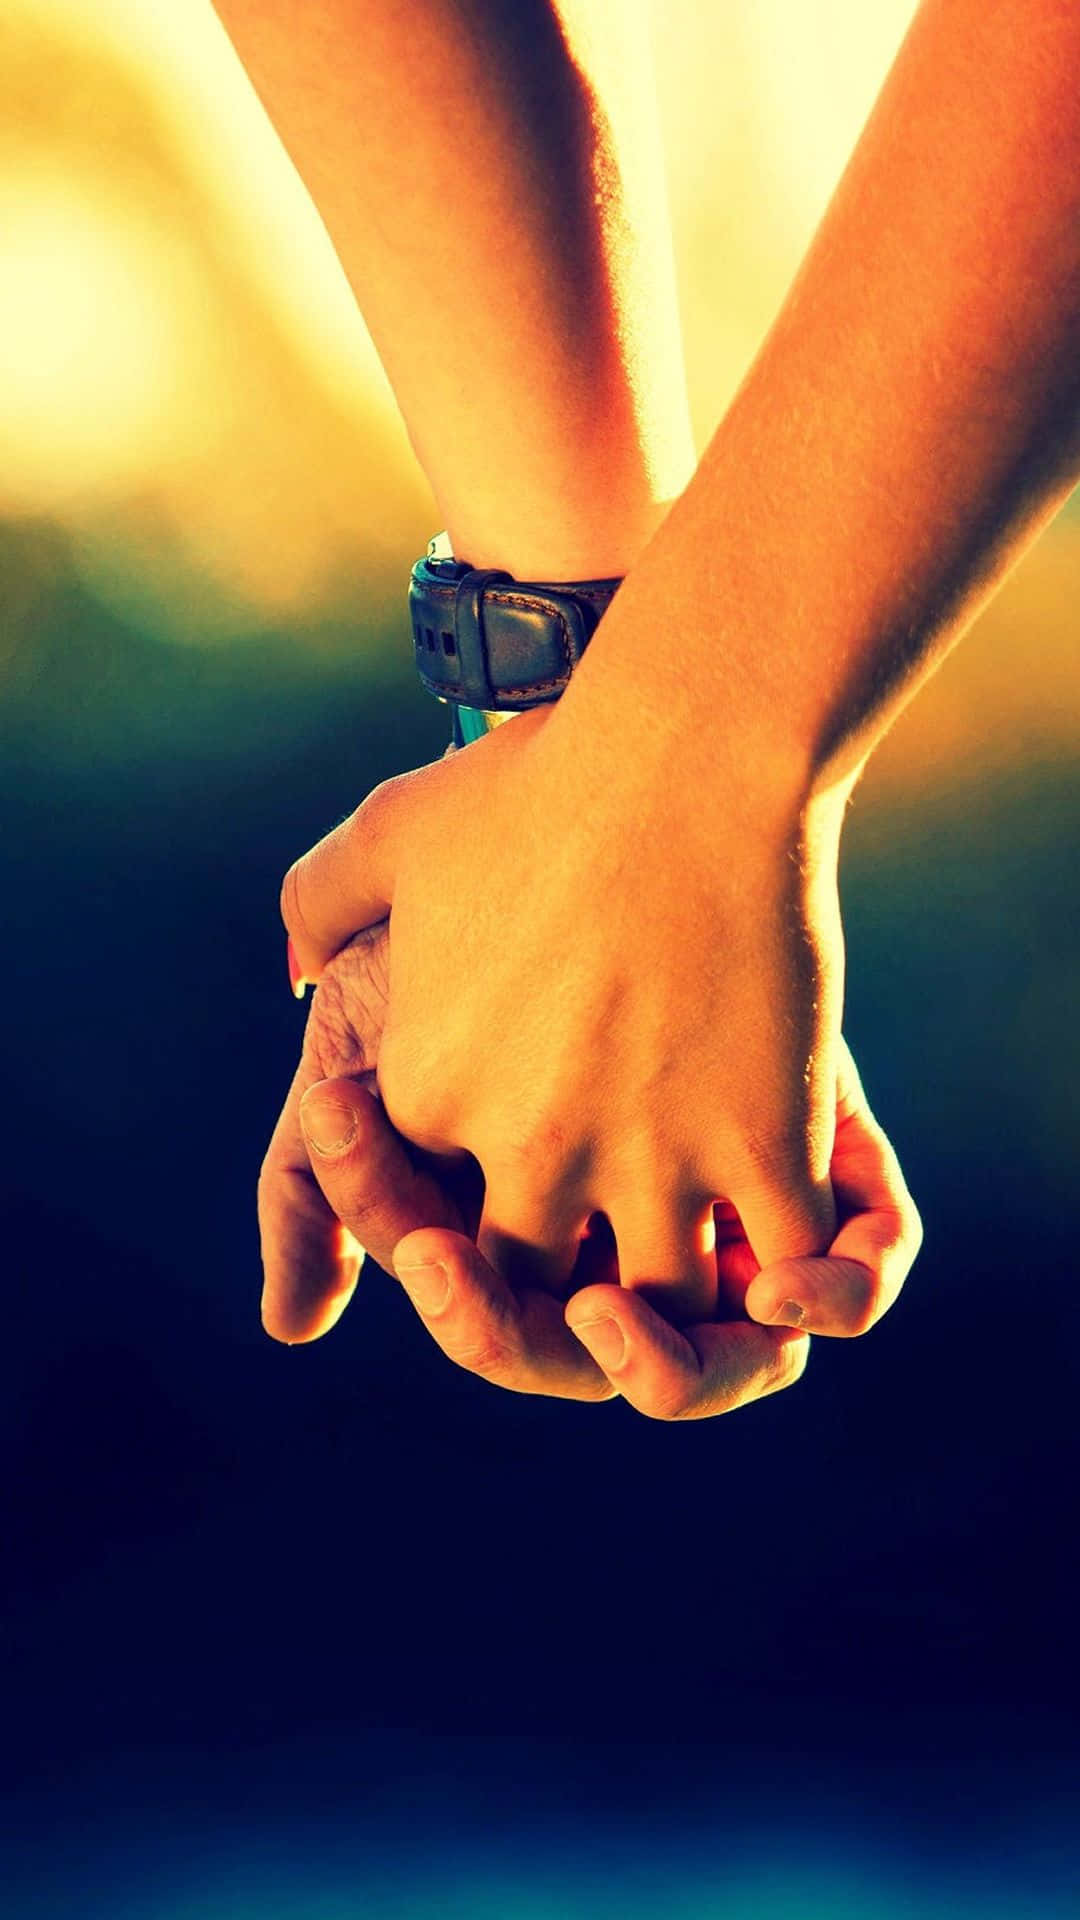 Holding Hands With Wristwatch Wallpaper